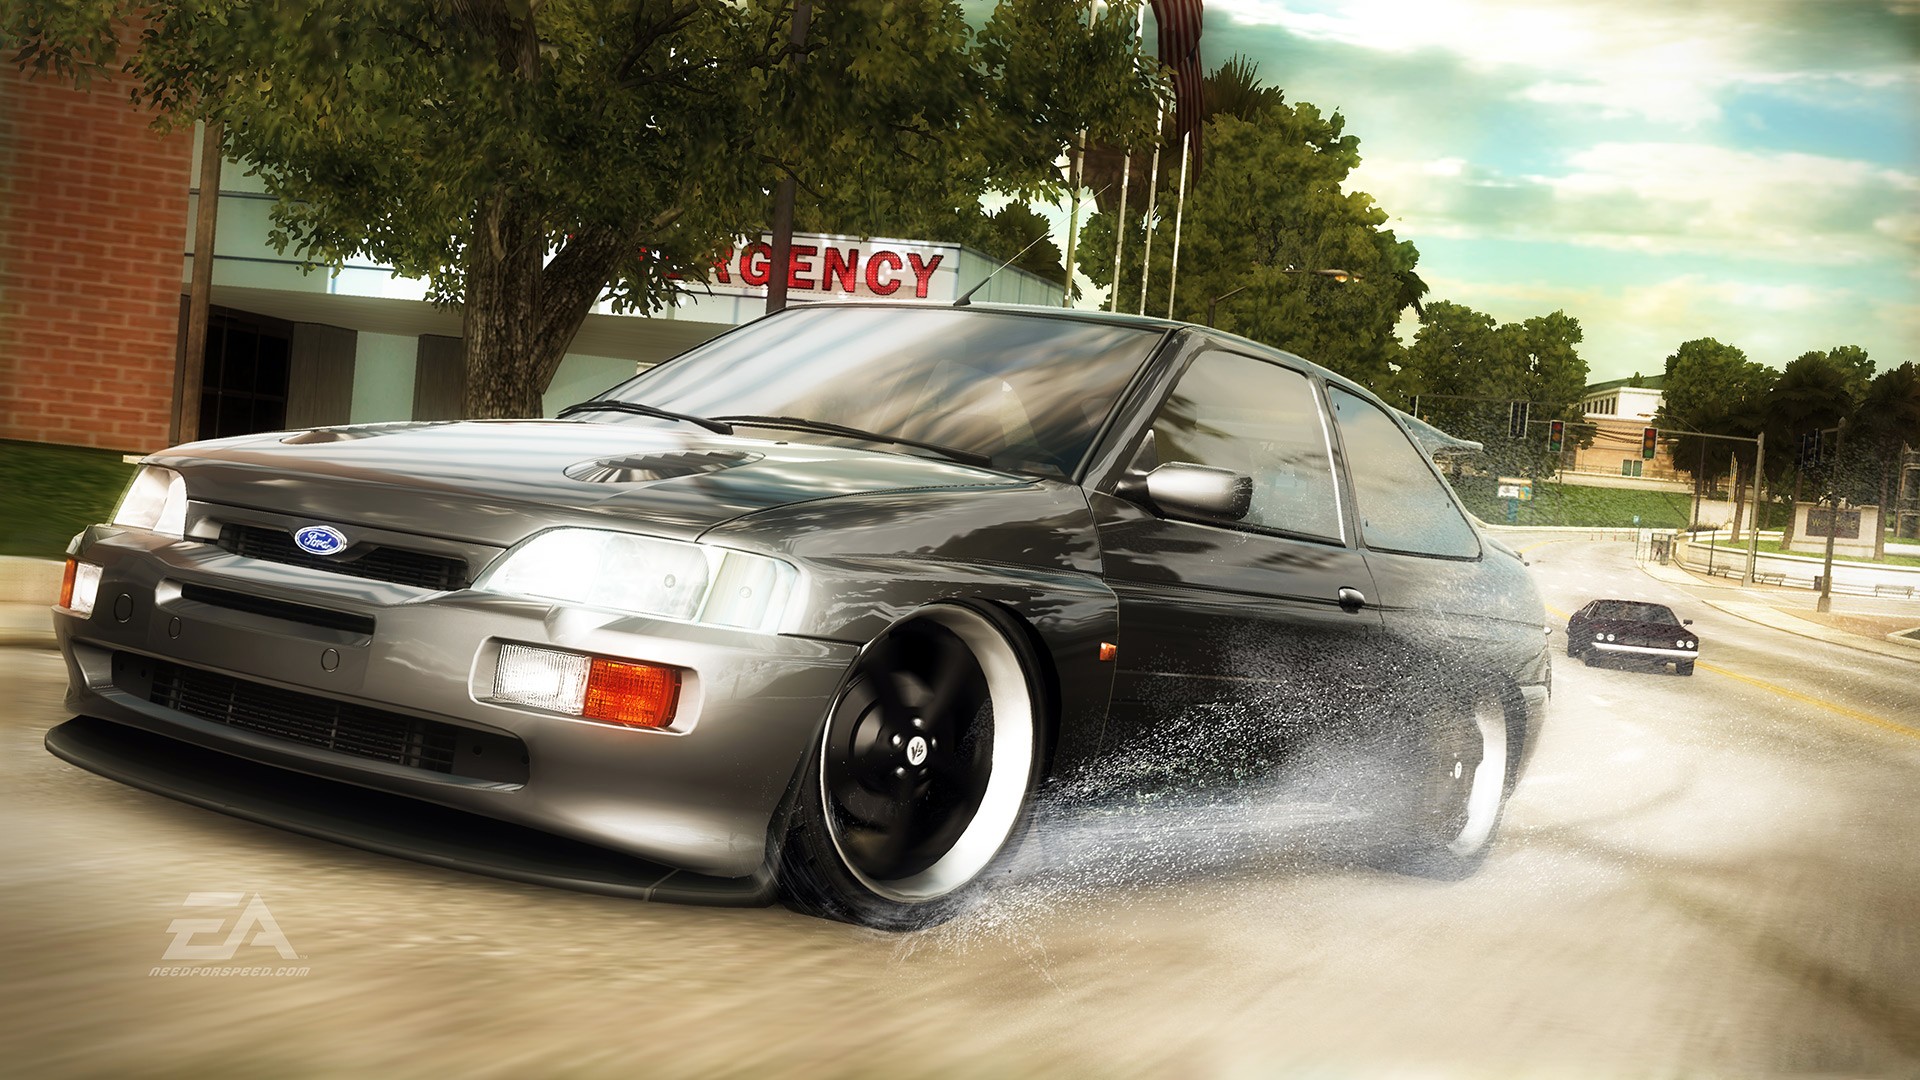 video games, cars, Need for Speed, Need For Speed Undercover, Ford Escort, games, pc games - desktop wallpaper